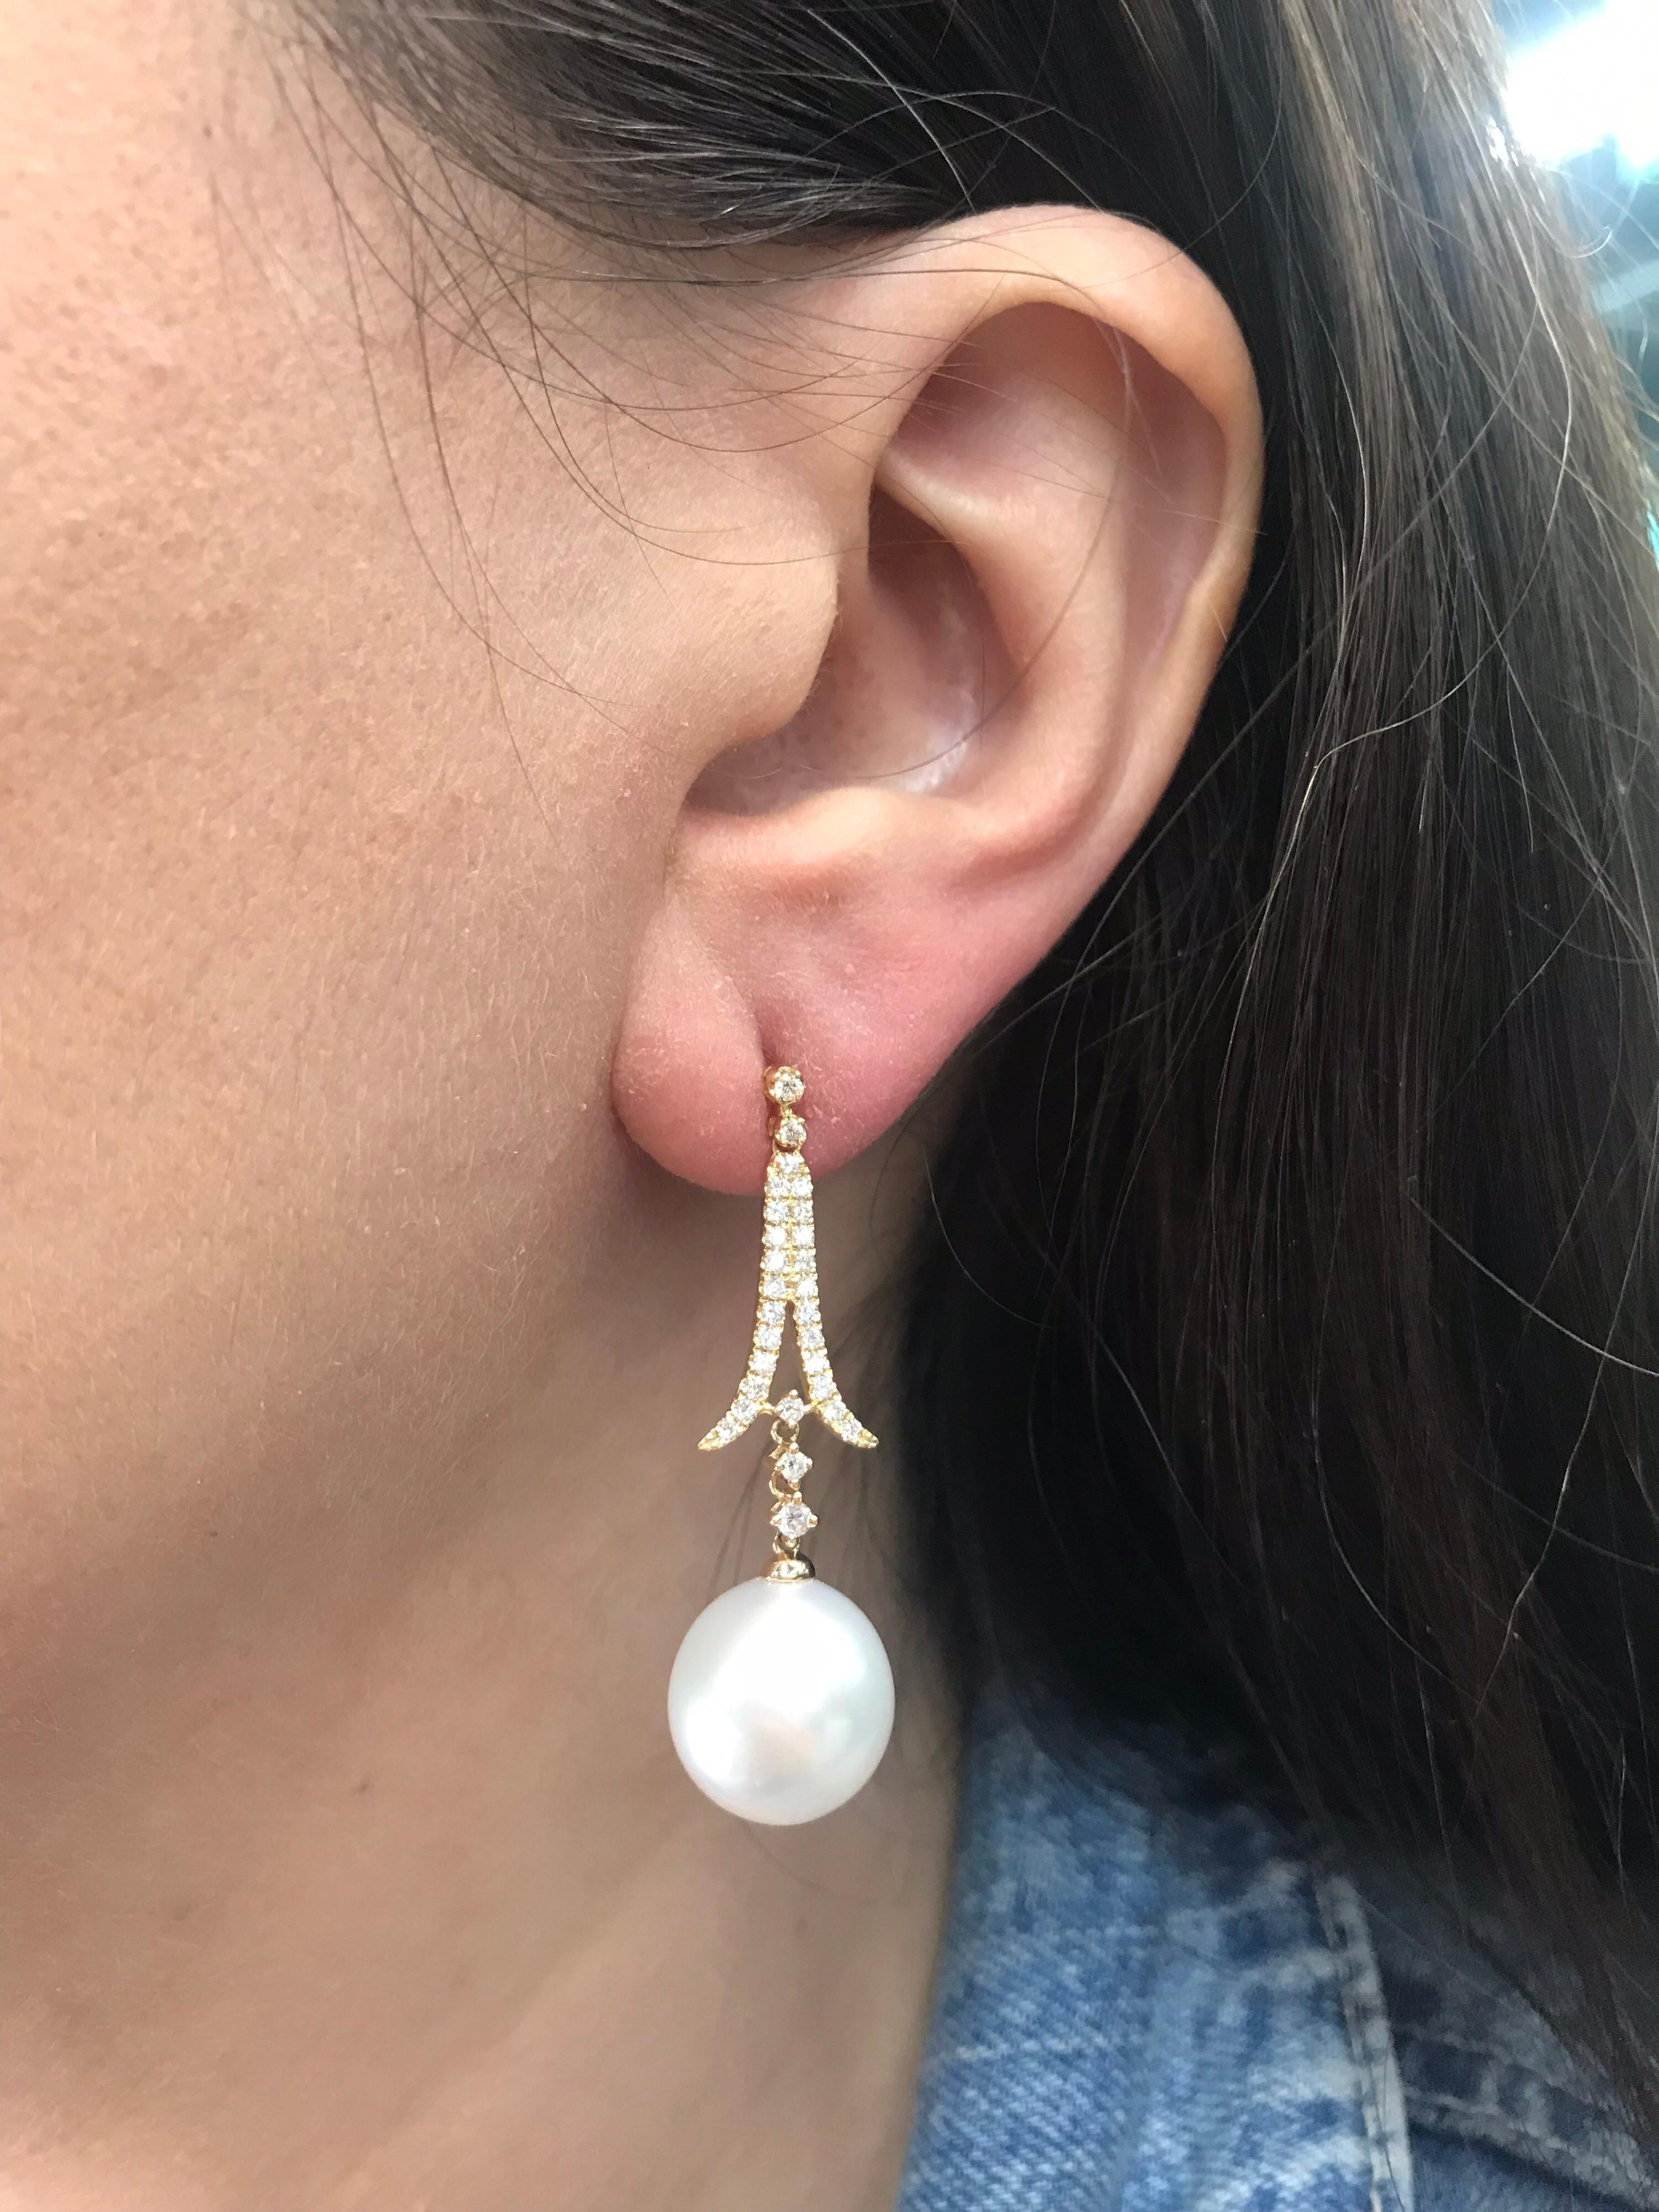 18K Yellow gold drop earrings featuring 56 round brilliants weighing 0.60 carats and two South Sea pearls measuring 12-13 mm. 